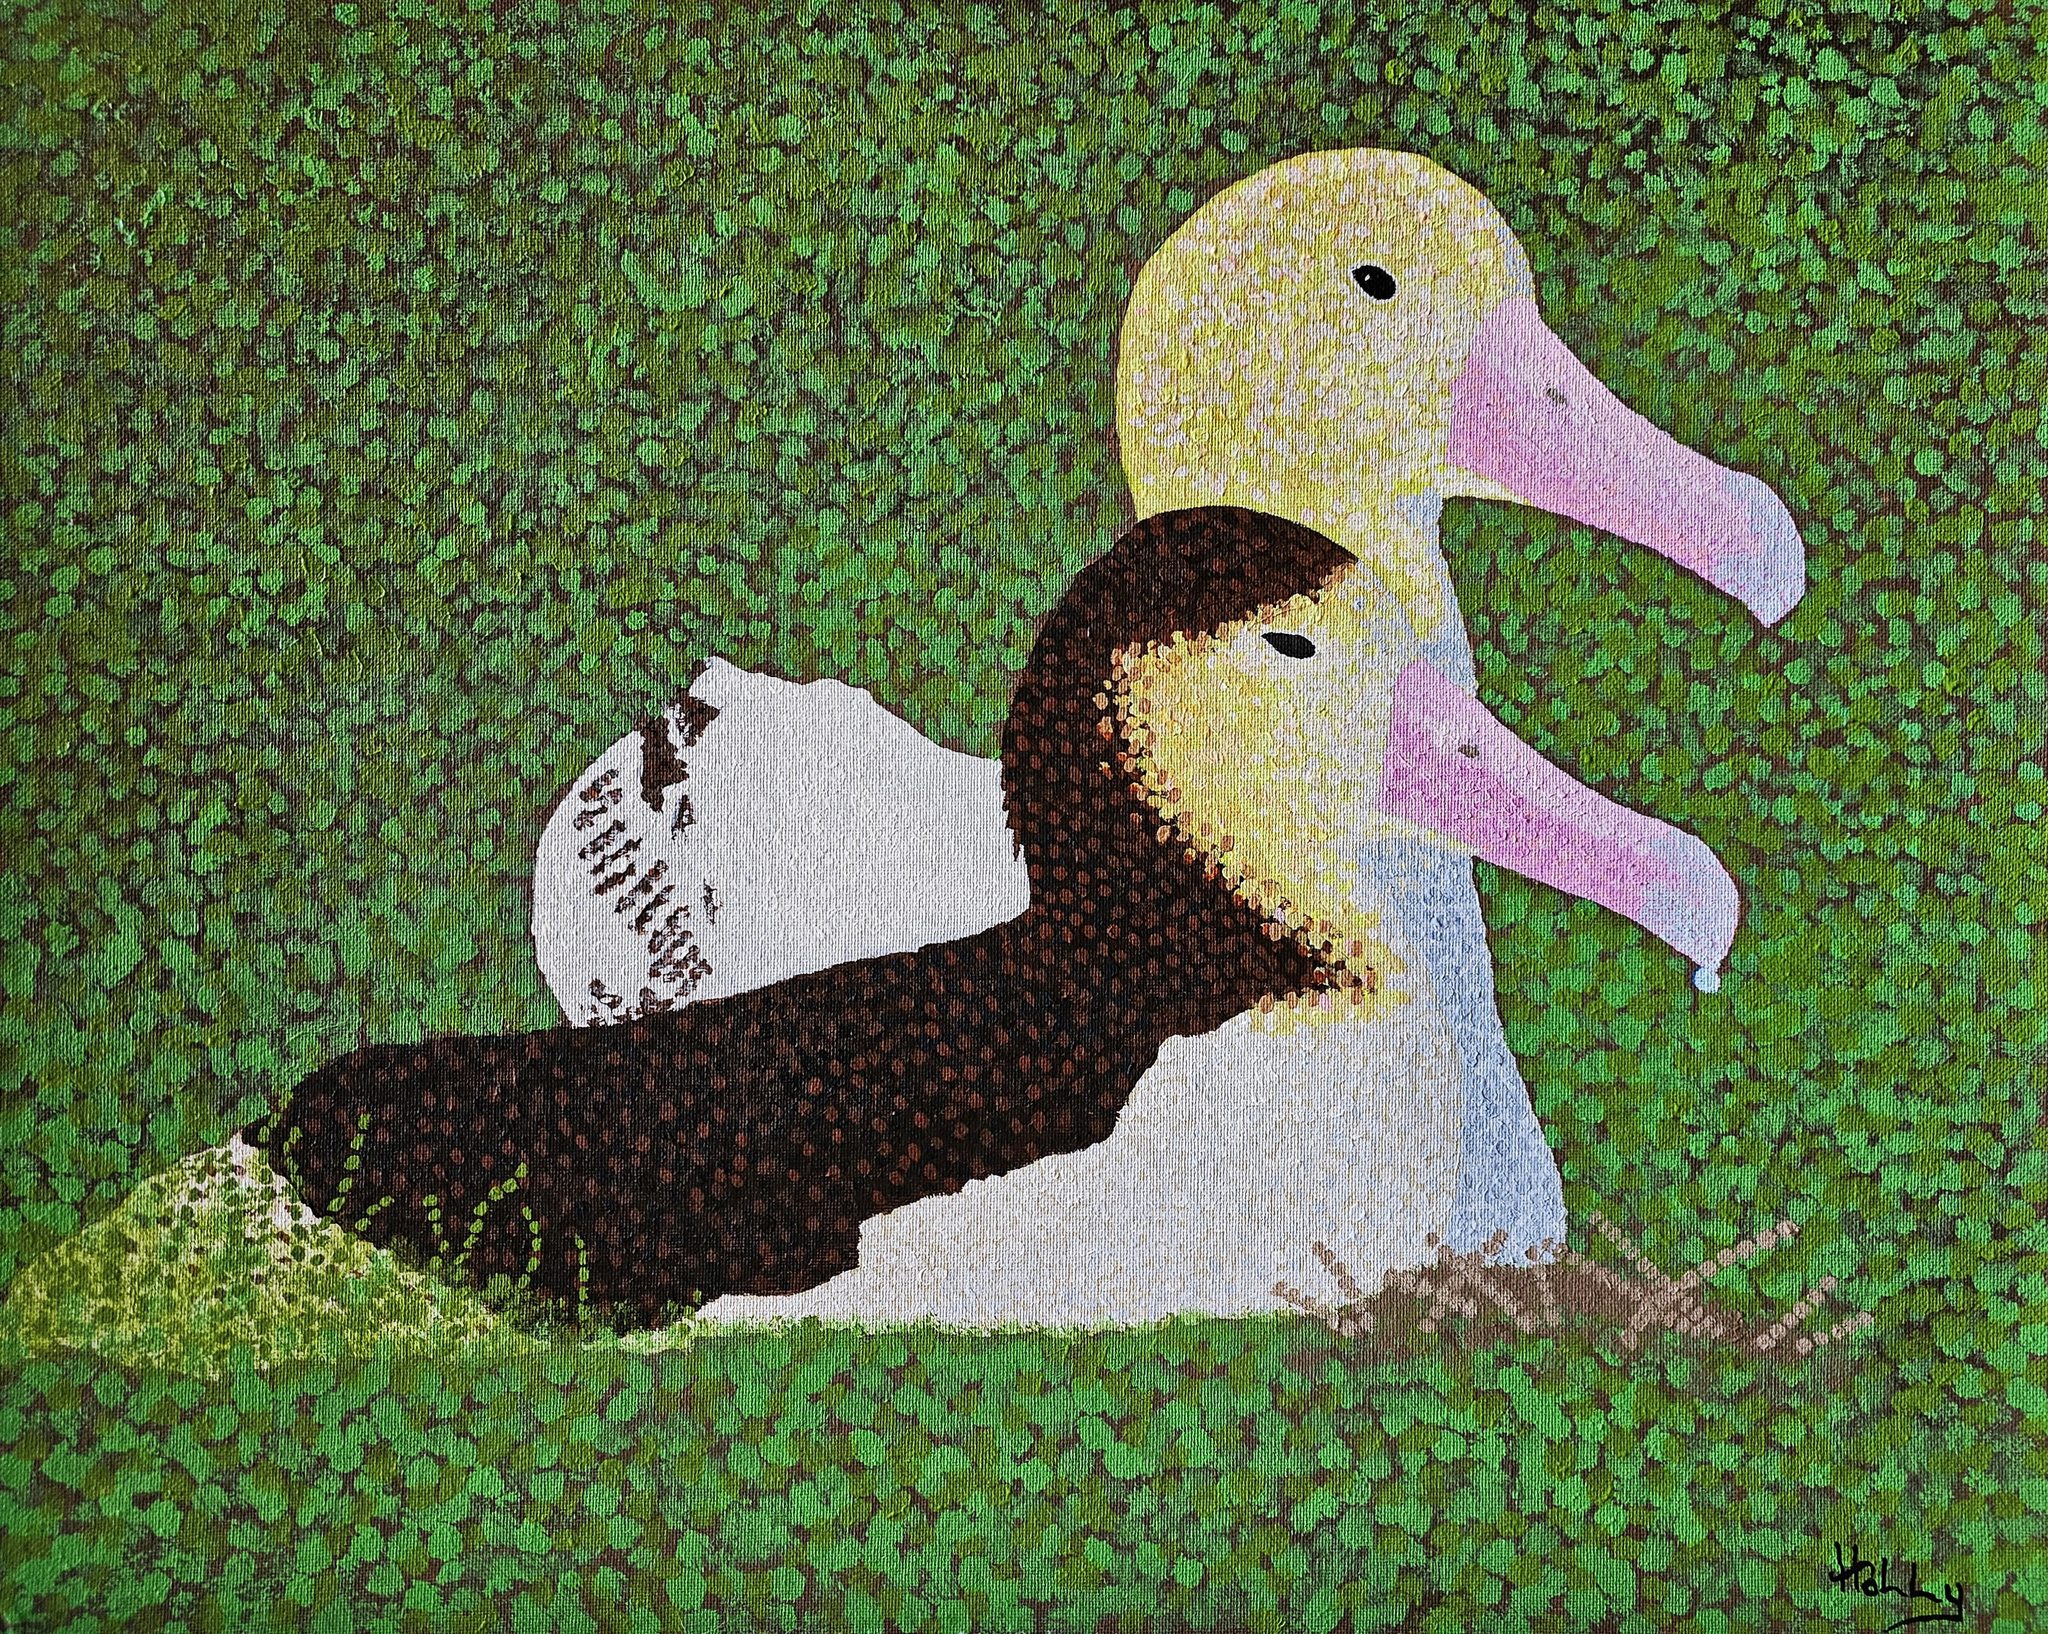 Holly Parsons Short tailed Albatrosses George and Geraldine after Jonathon Plissner